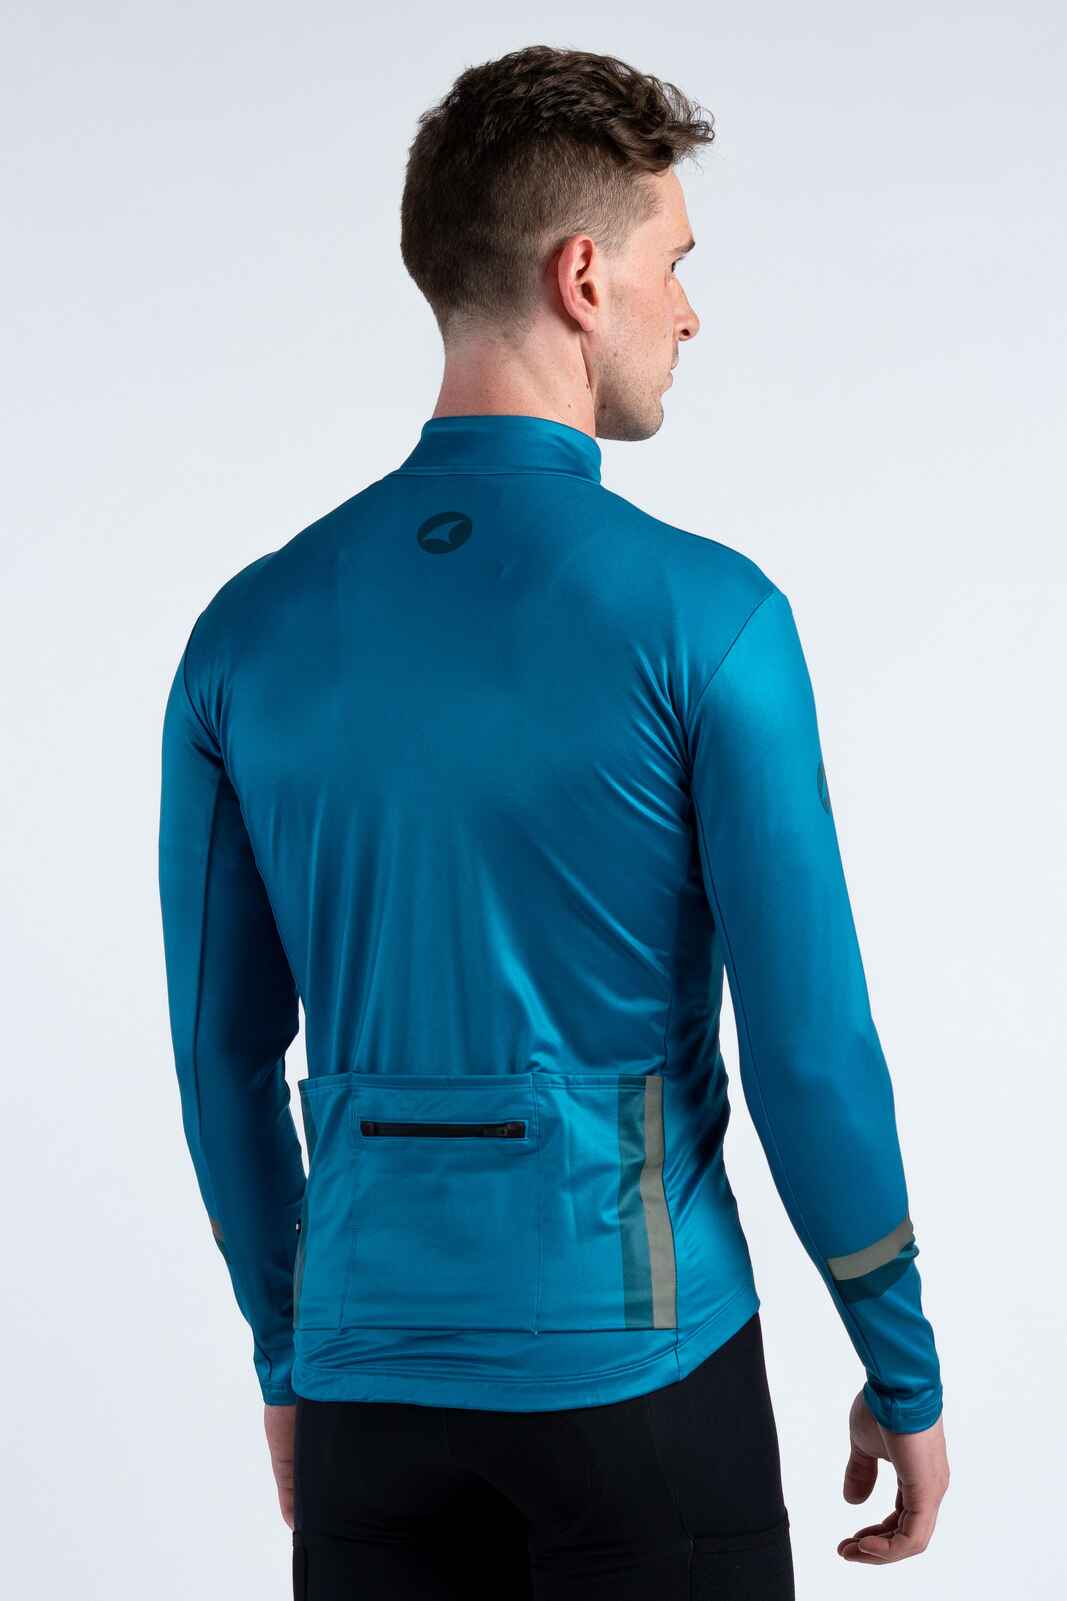 Men's Teal Thermal Cycling Jersey - Front View